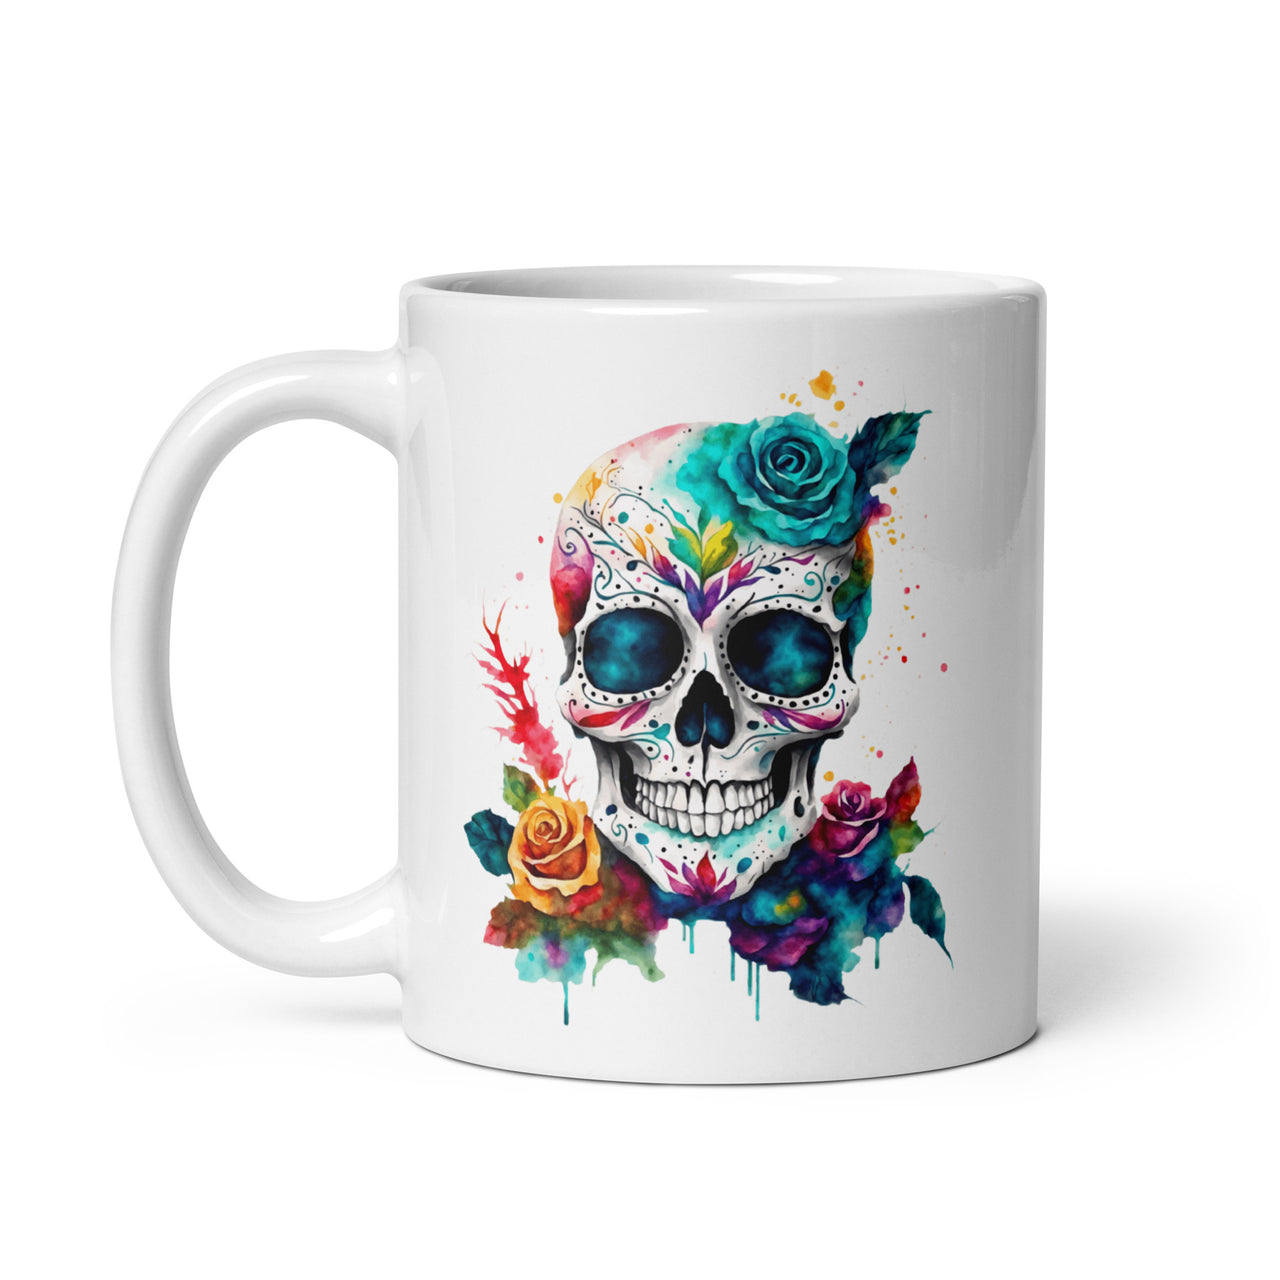 Sugar Skull Day Of The Dead Floral Novelty Gothic Gift Coffee Cup Mug -White